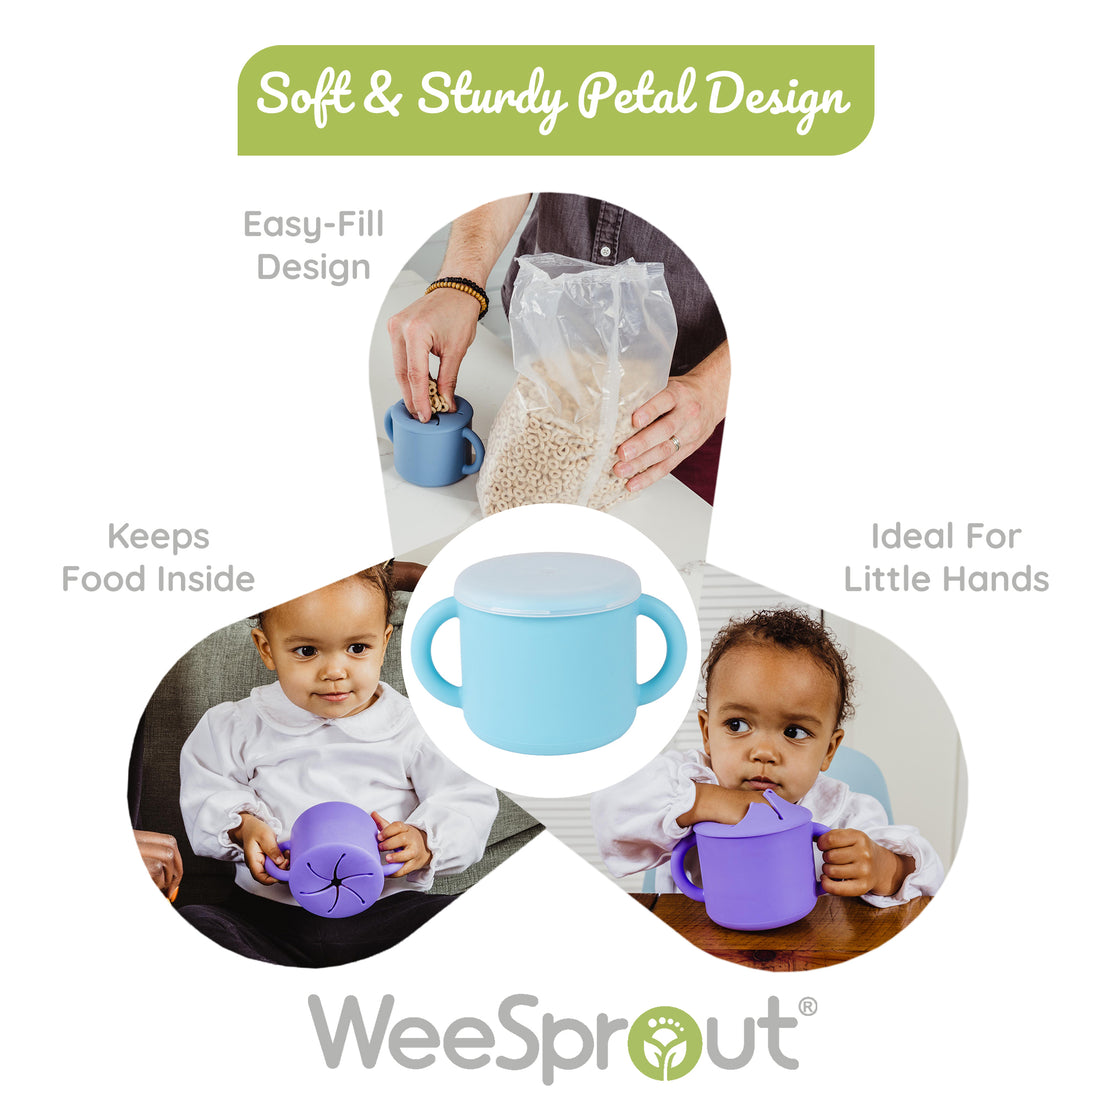 WeeSprout Glass Cups with Lids & Straws, Spill-Resistant Cups for Toddlers & Kids, Triple As Toddler Cups, Baby Food Storage & Snack Jars, XL Silicone